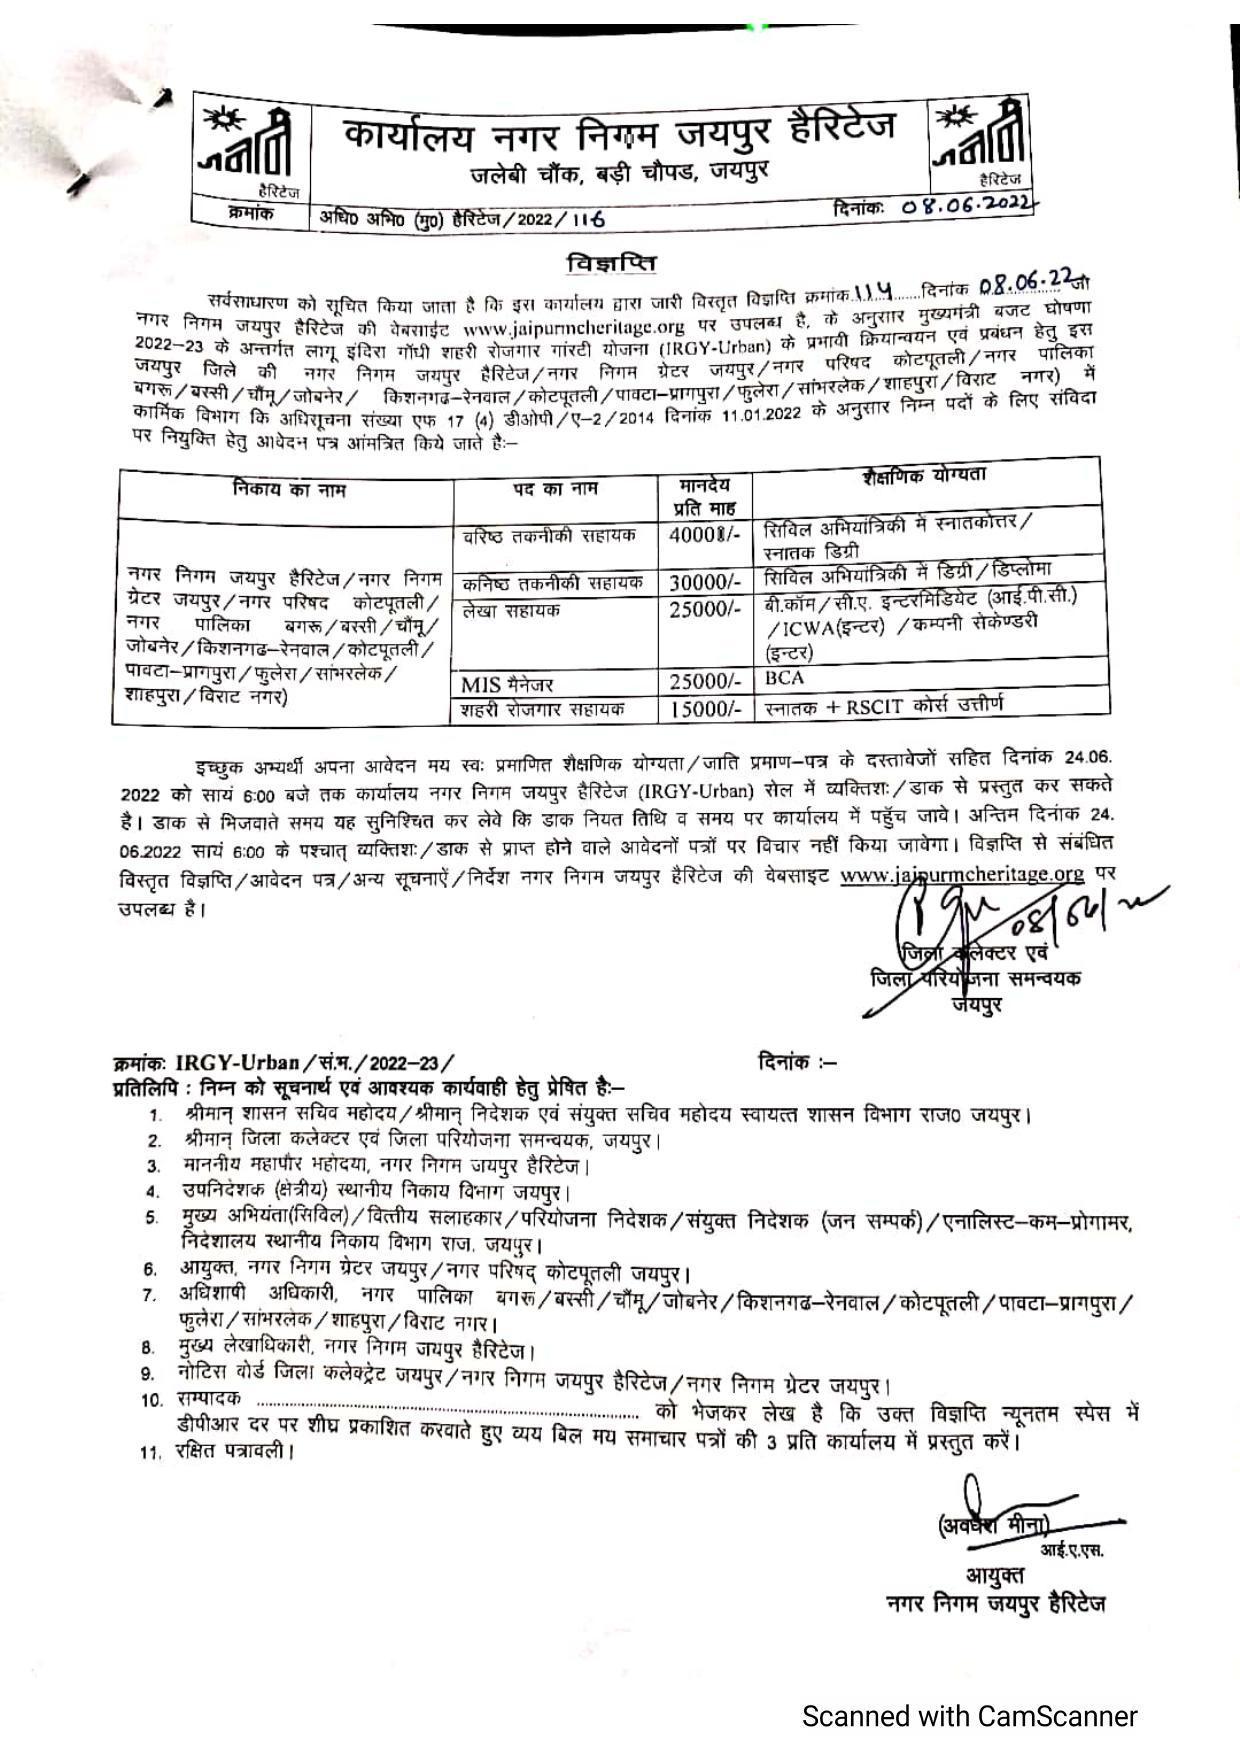 Jaipur Municipal Corporation Invites Application for 104 MIS Manager and Various Posts Recruitment 2022 - Page 5